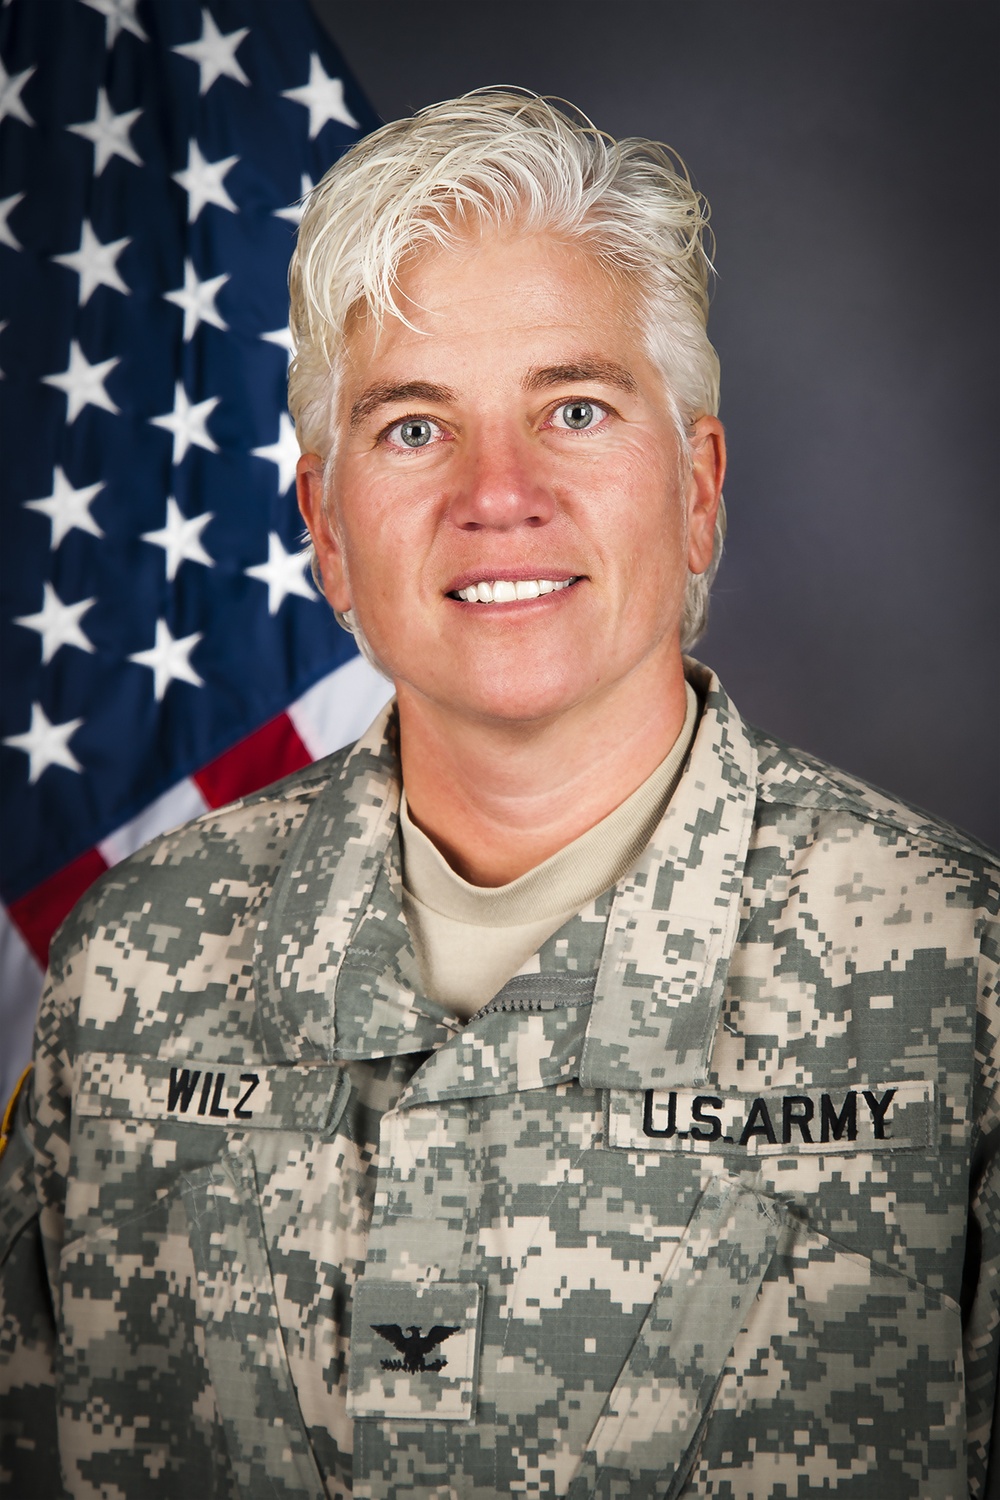 Wilz to become first female general in North Dakota Army National Guard